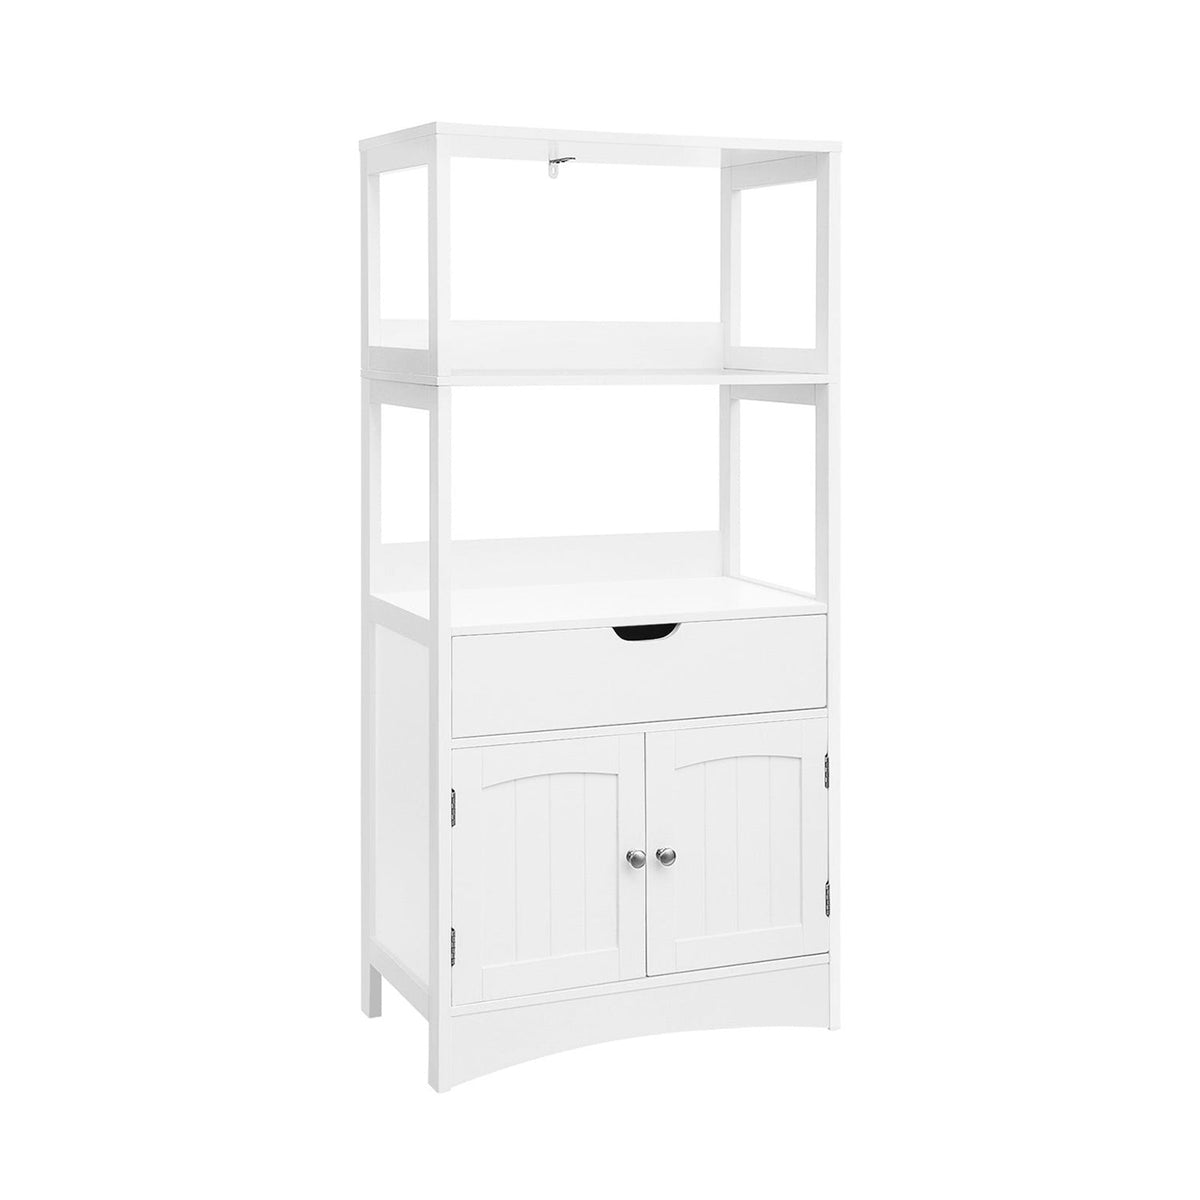 White Bathroom Floor Cabinet with Storage Drawer 2 Open Shelves